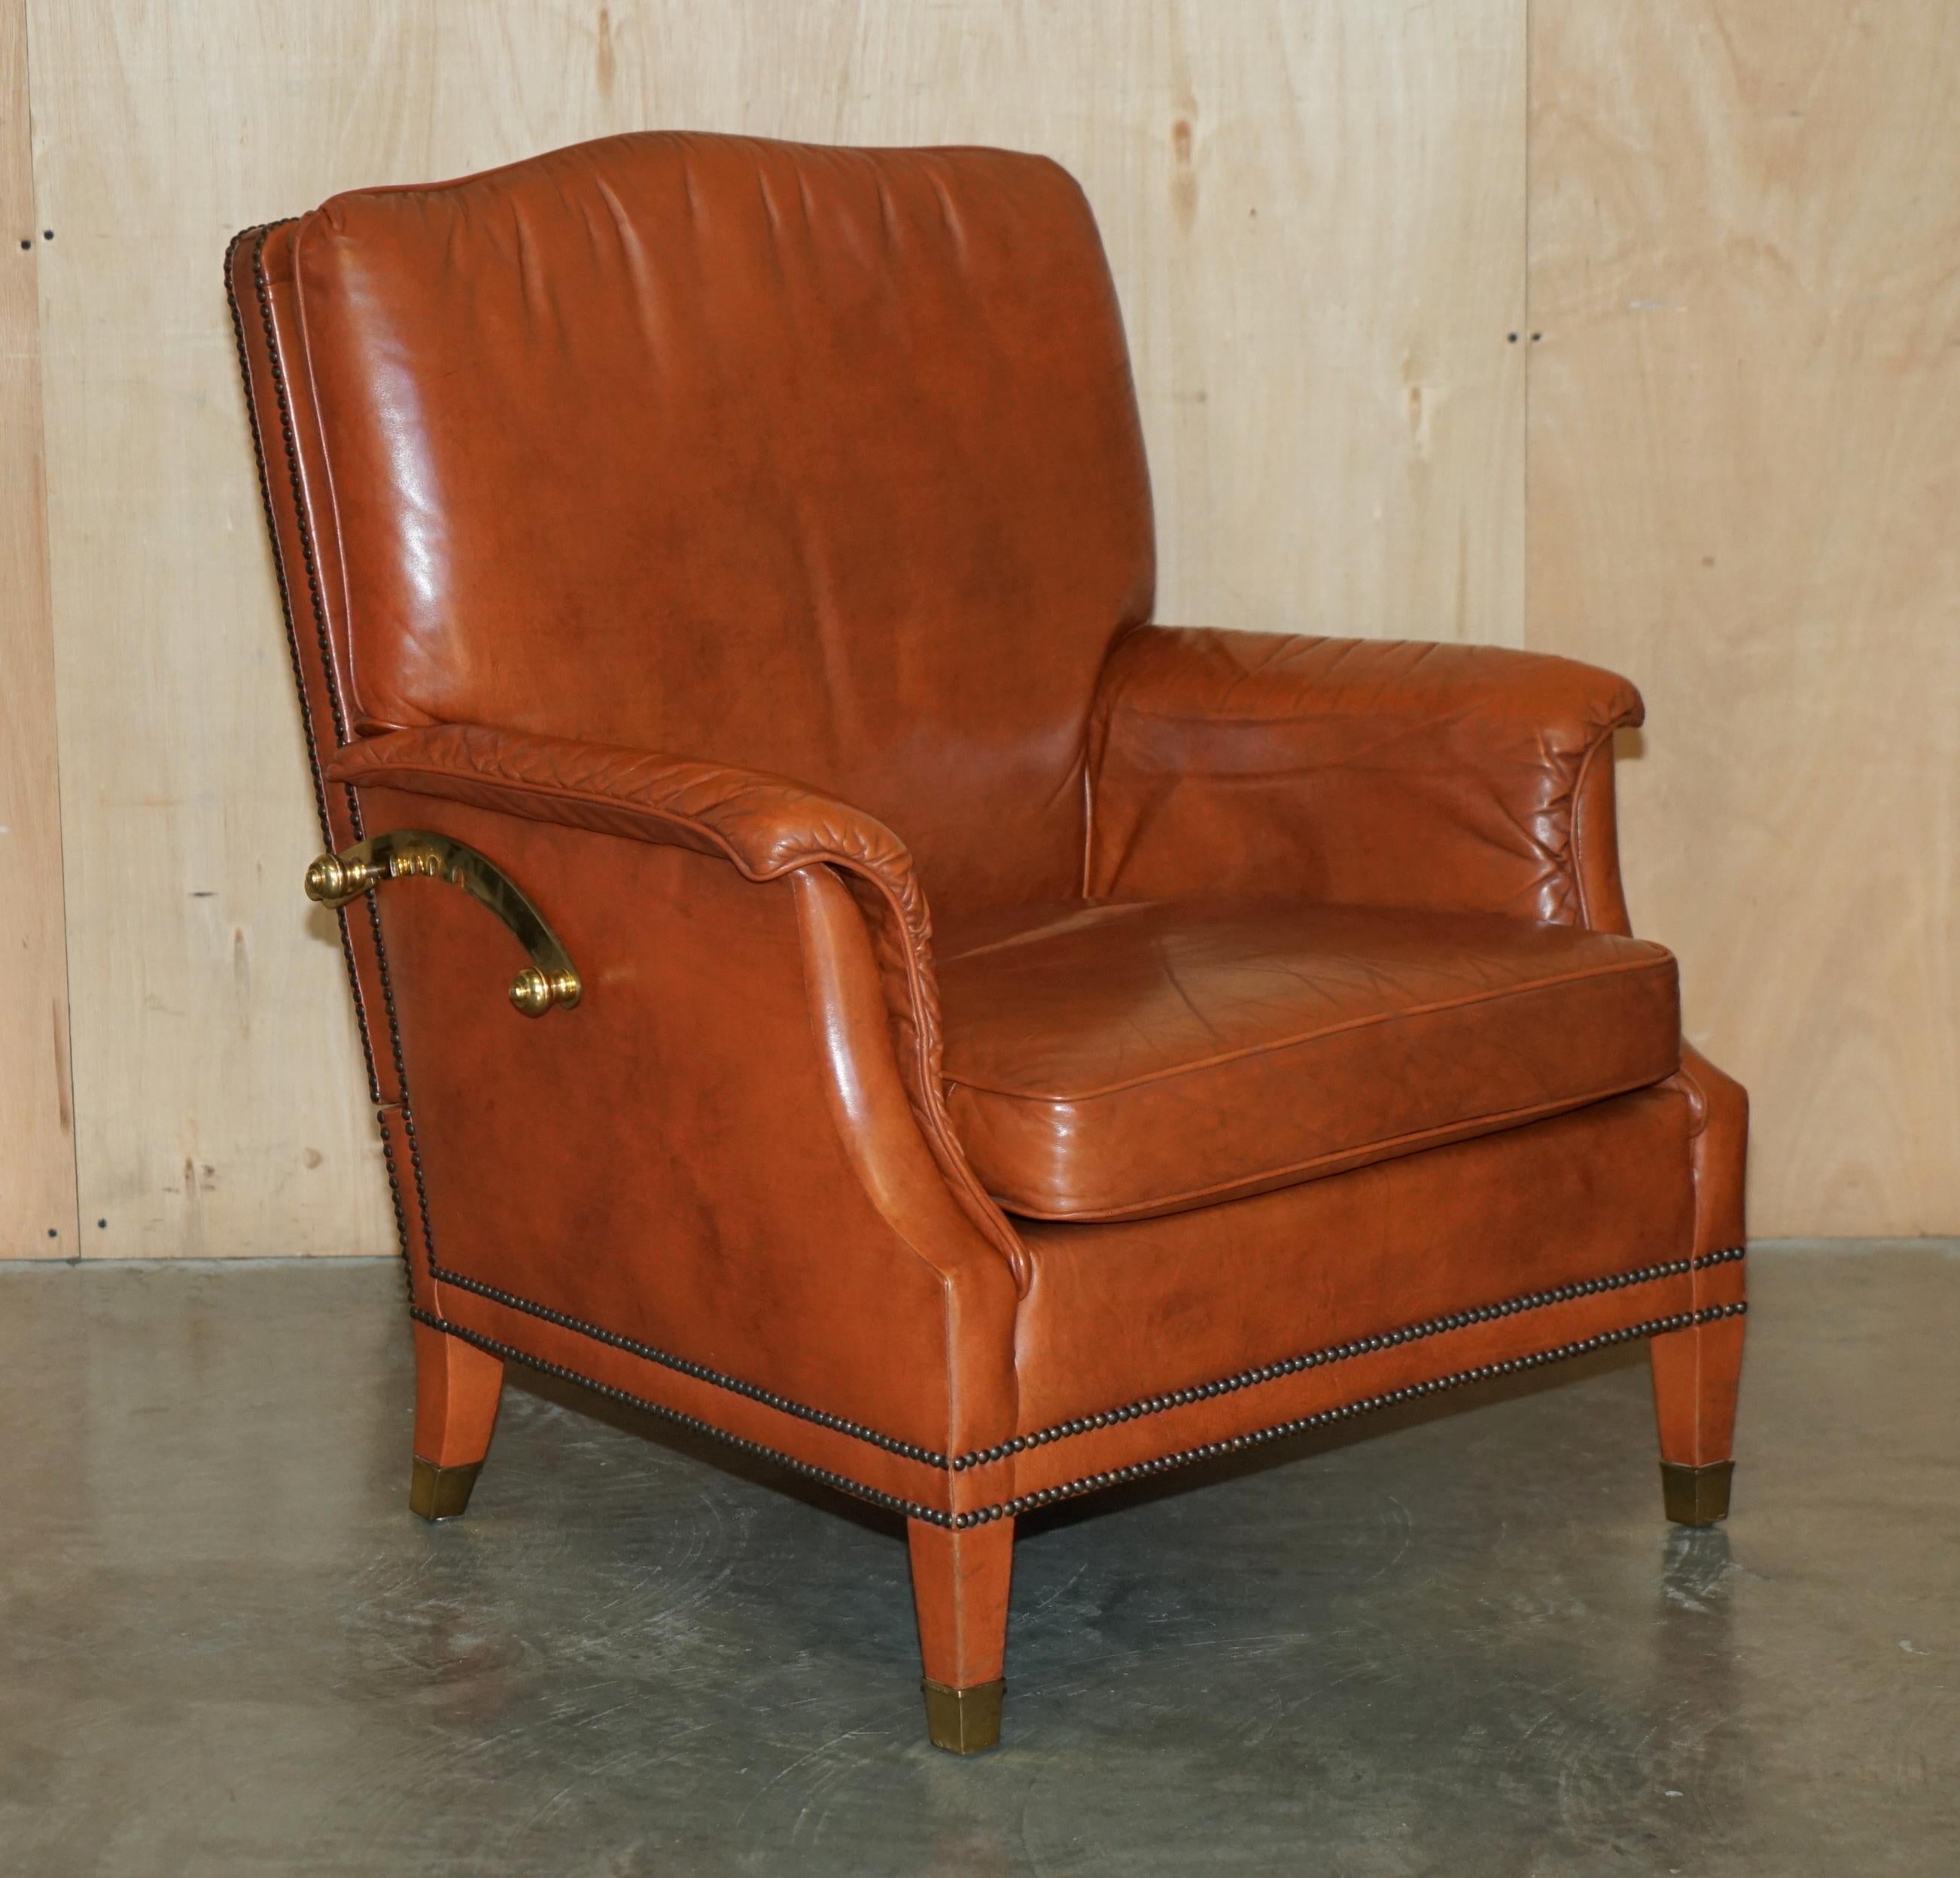 Royal House Antiques

Royal House Antiques is delighted to offer for sale this very well made pair of super comfortable leather recliner armchair with oversized brass mounts

Please note the delivery fee listed is just a guide, it covers within the